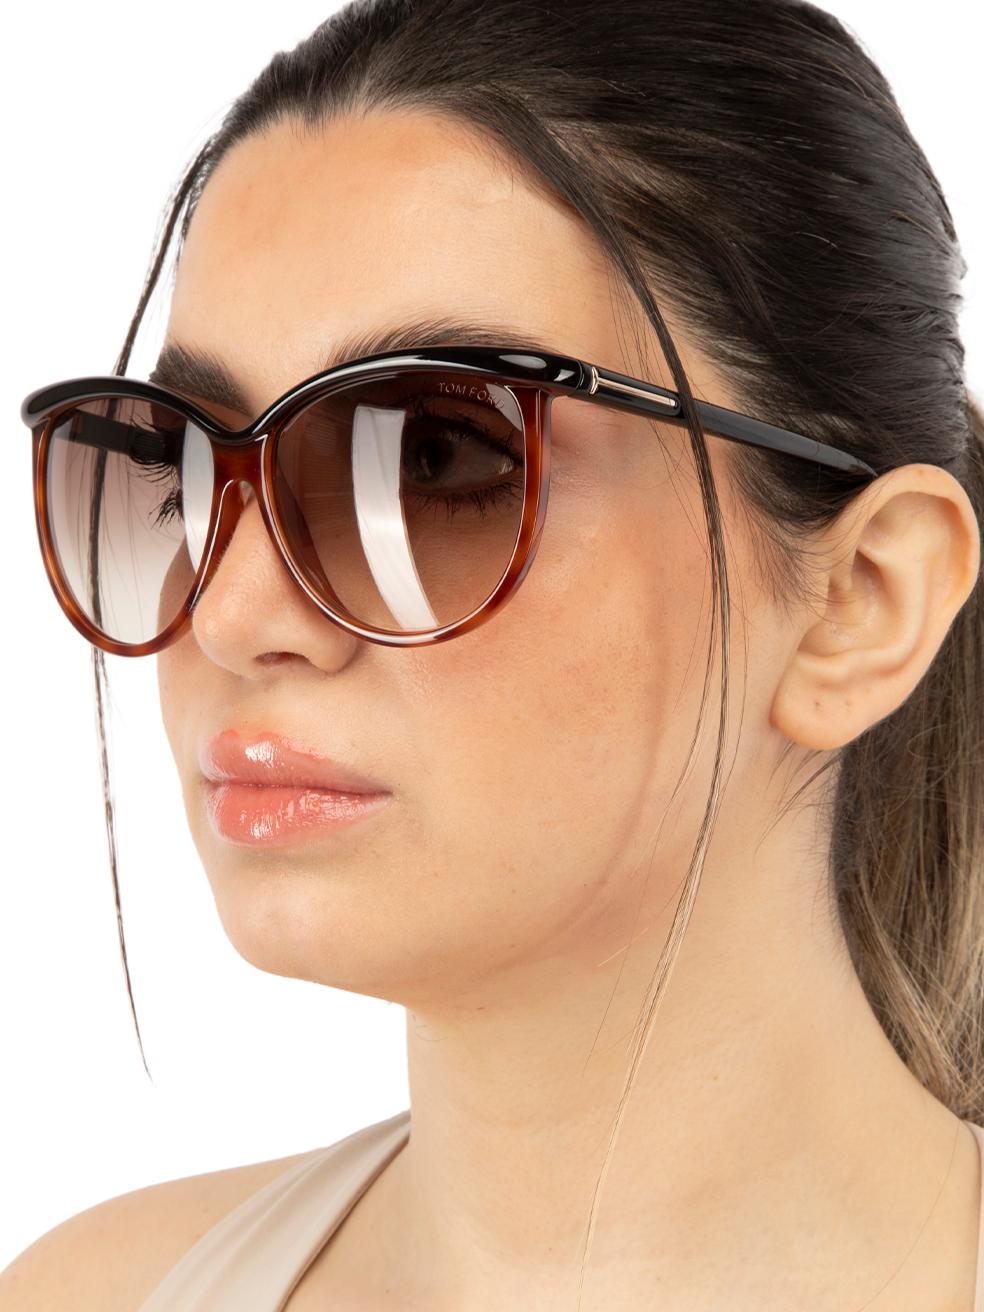 CONDITION is New with tagson this brand new Tom Ford designer item. This item comes with original packaging.
 
 
 
 Details
 
 
 Model: FT0296
 
 Black Havana
 
 Acetate
 
 Cat Eye Sunglasses
 
 Brown Gradient Lens
 
 Full-Rim
 
 
 
 
 
 Made in